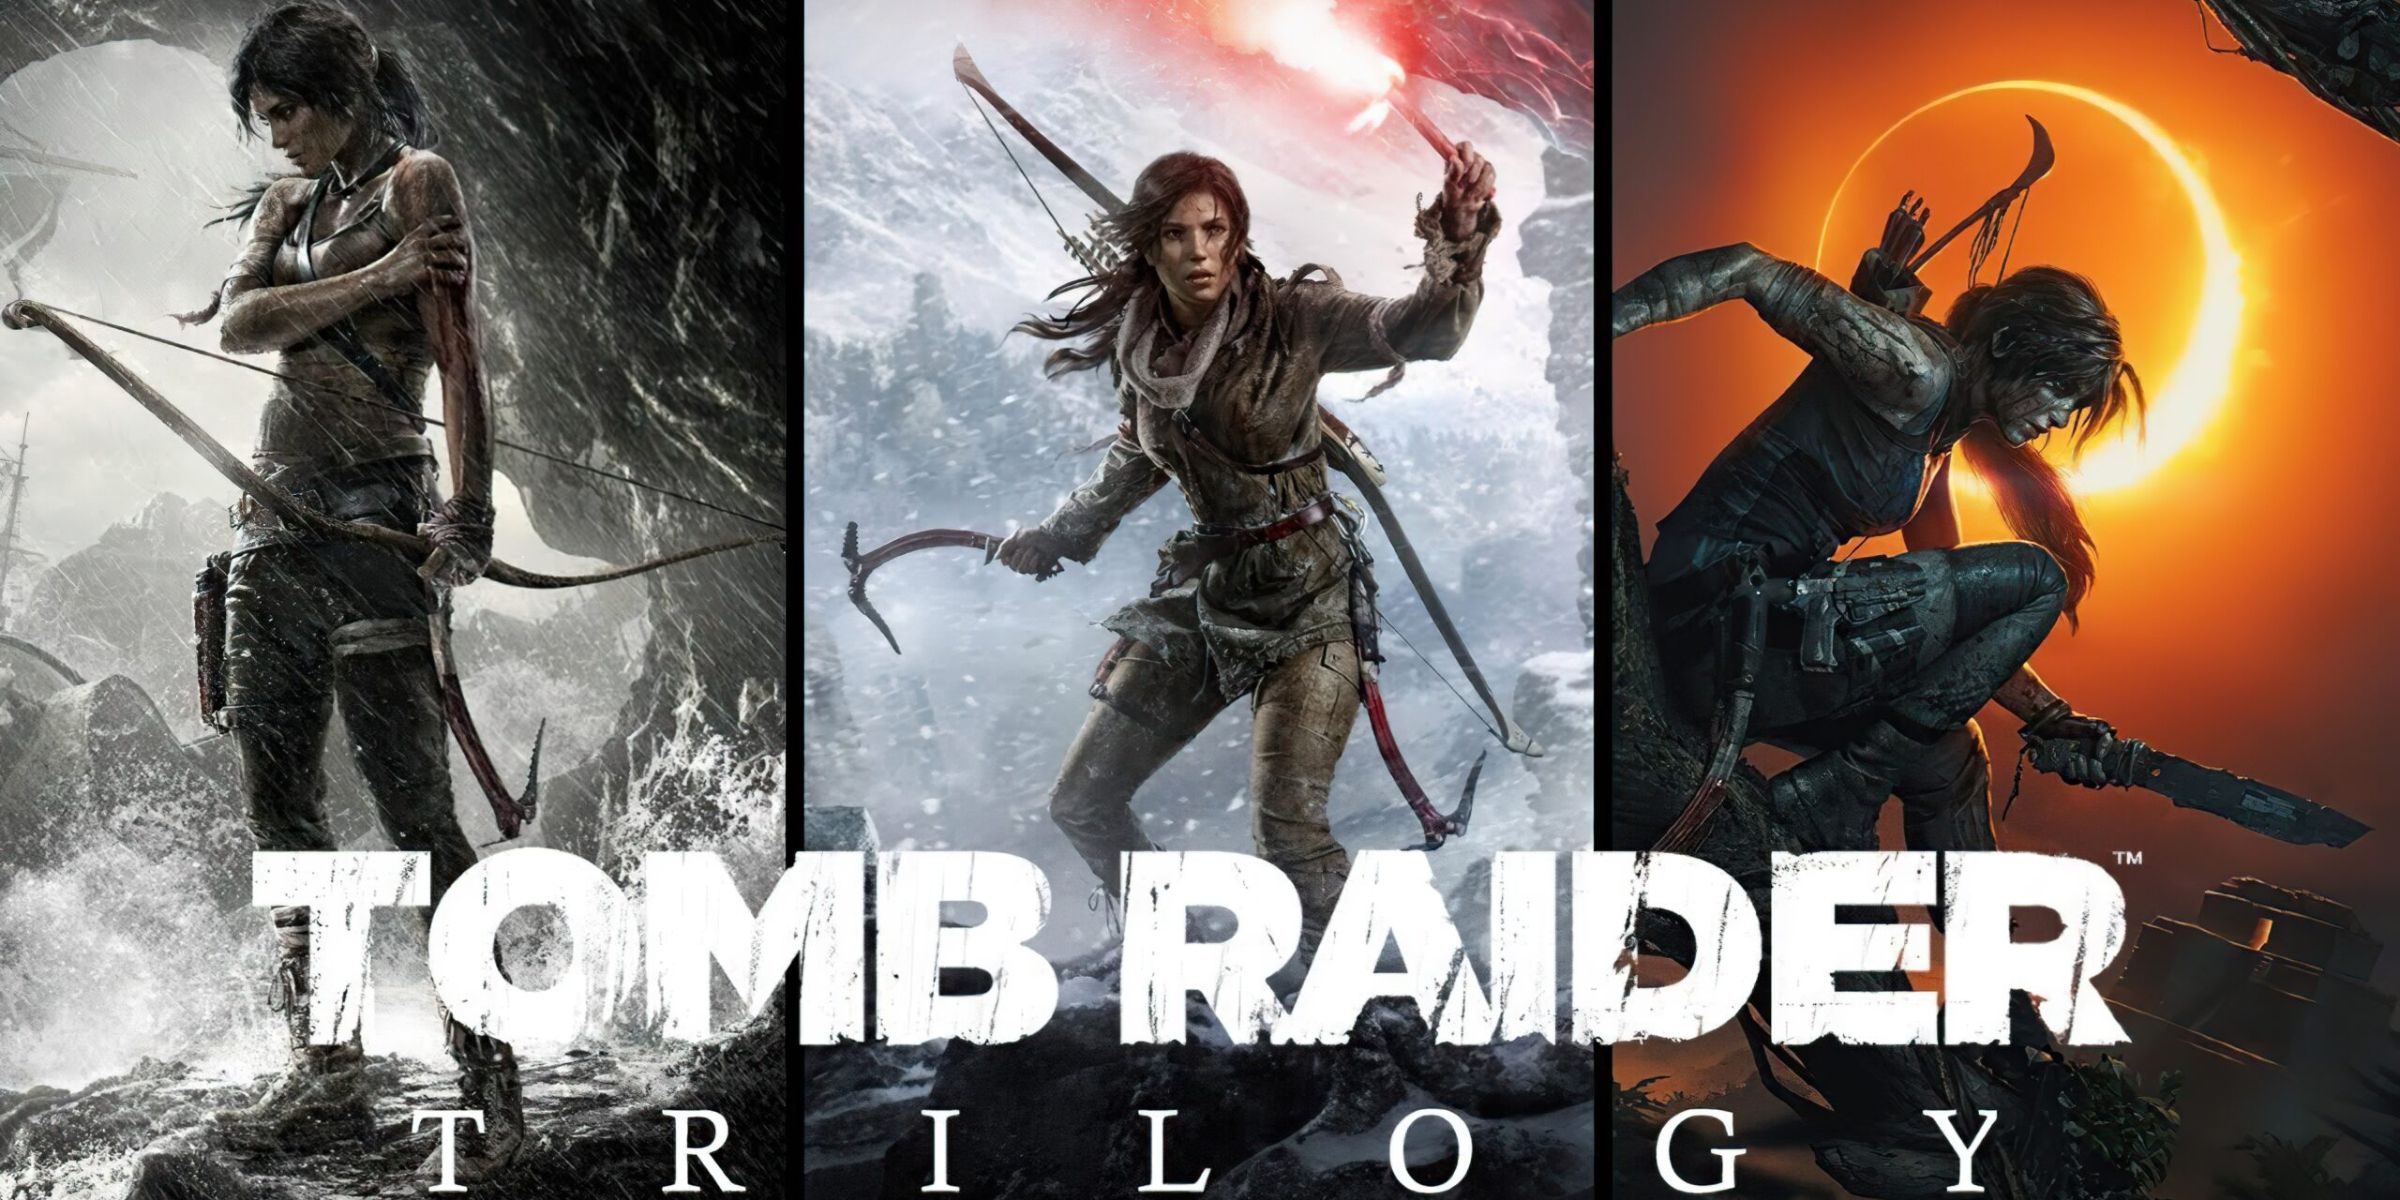 An official split image of the Tomb Raider games included in the Tomb Raider Reboot Trilogy